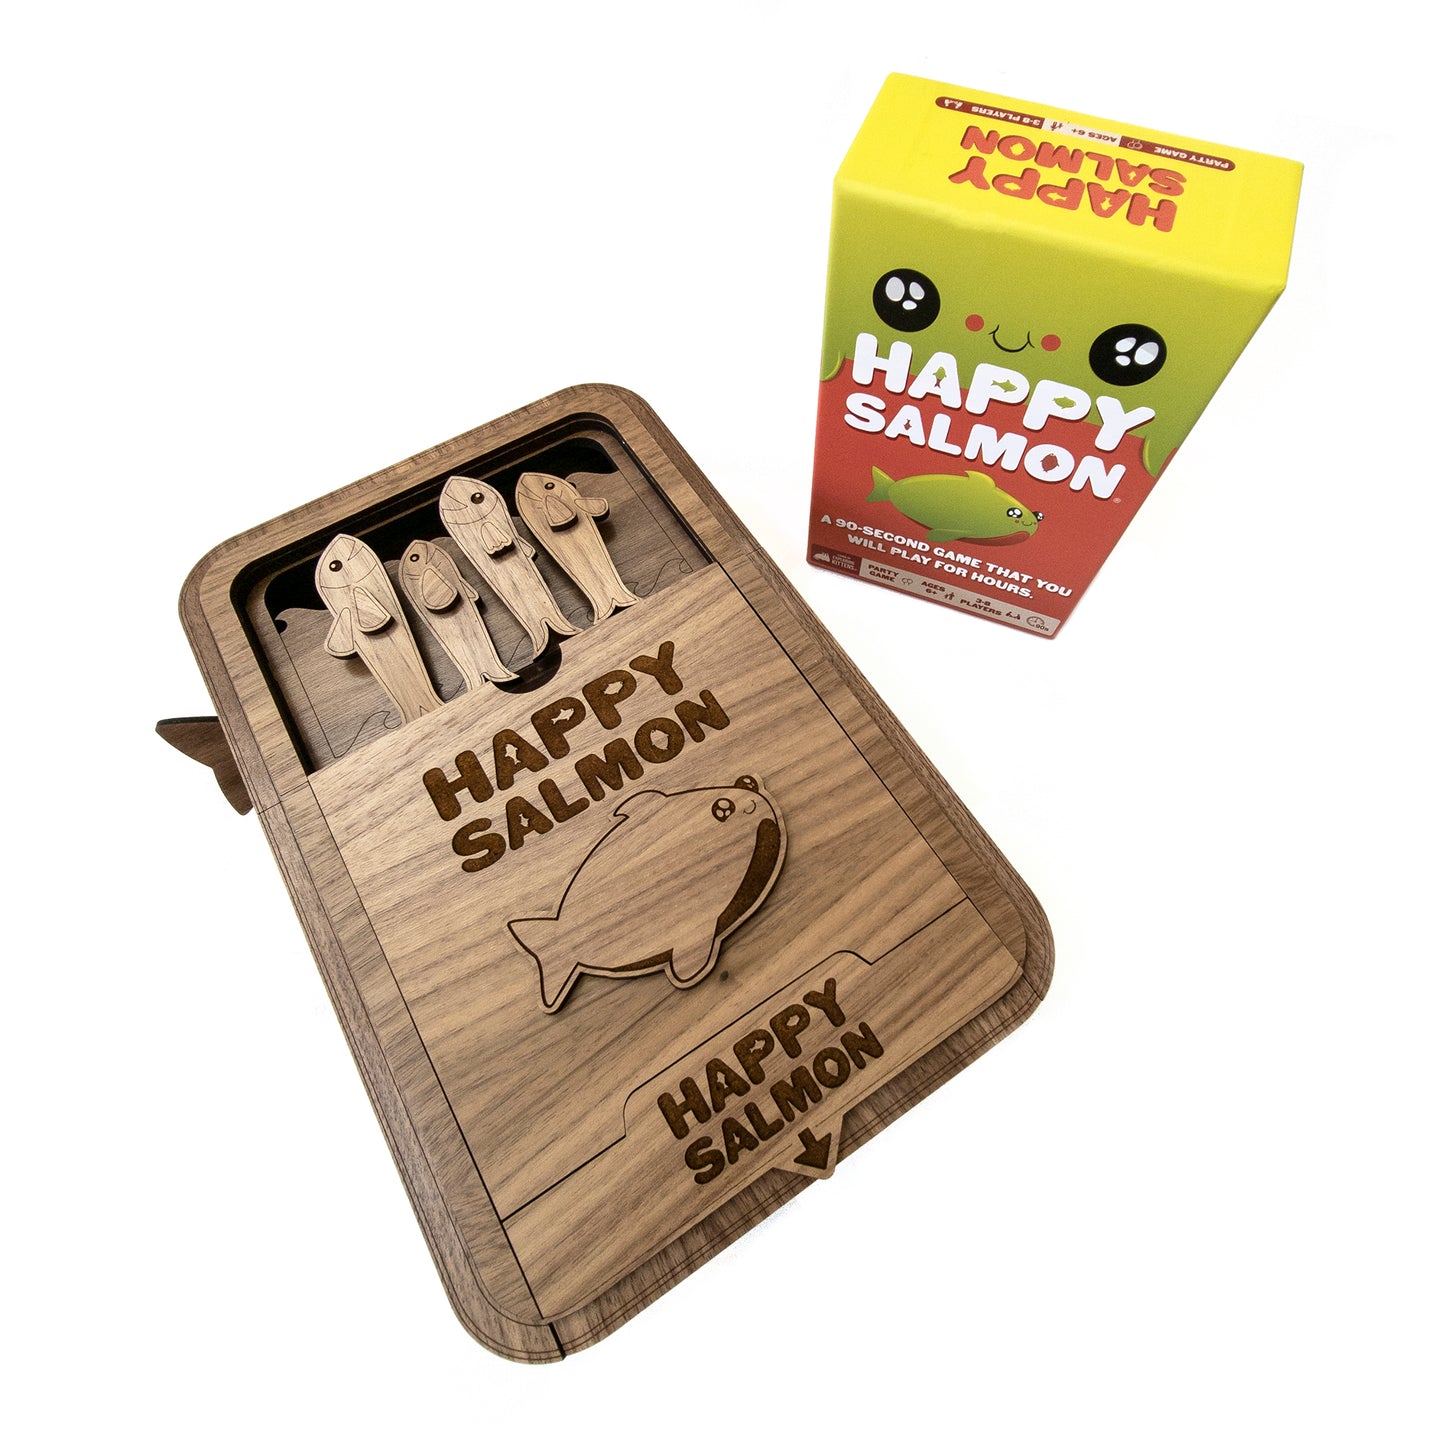 Happy Salmon Game Box with Jumping Salmon